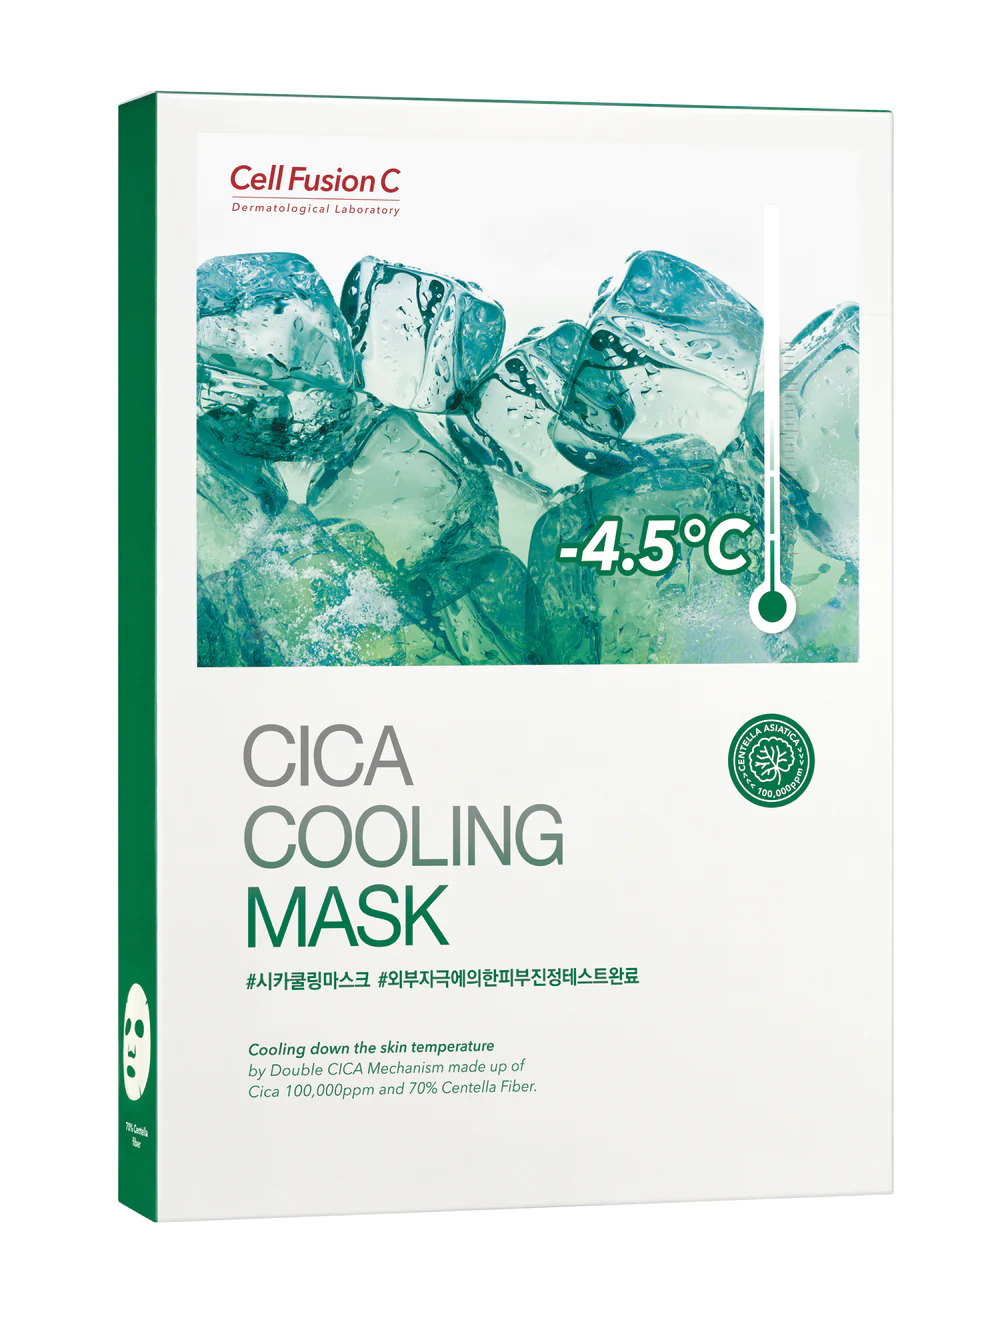 [Cell Fusion C] Cica Cooling Mask - 5 sheets